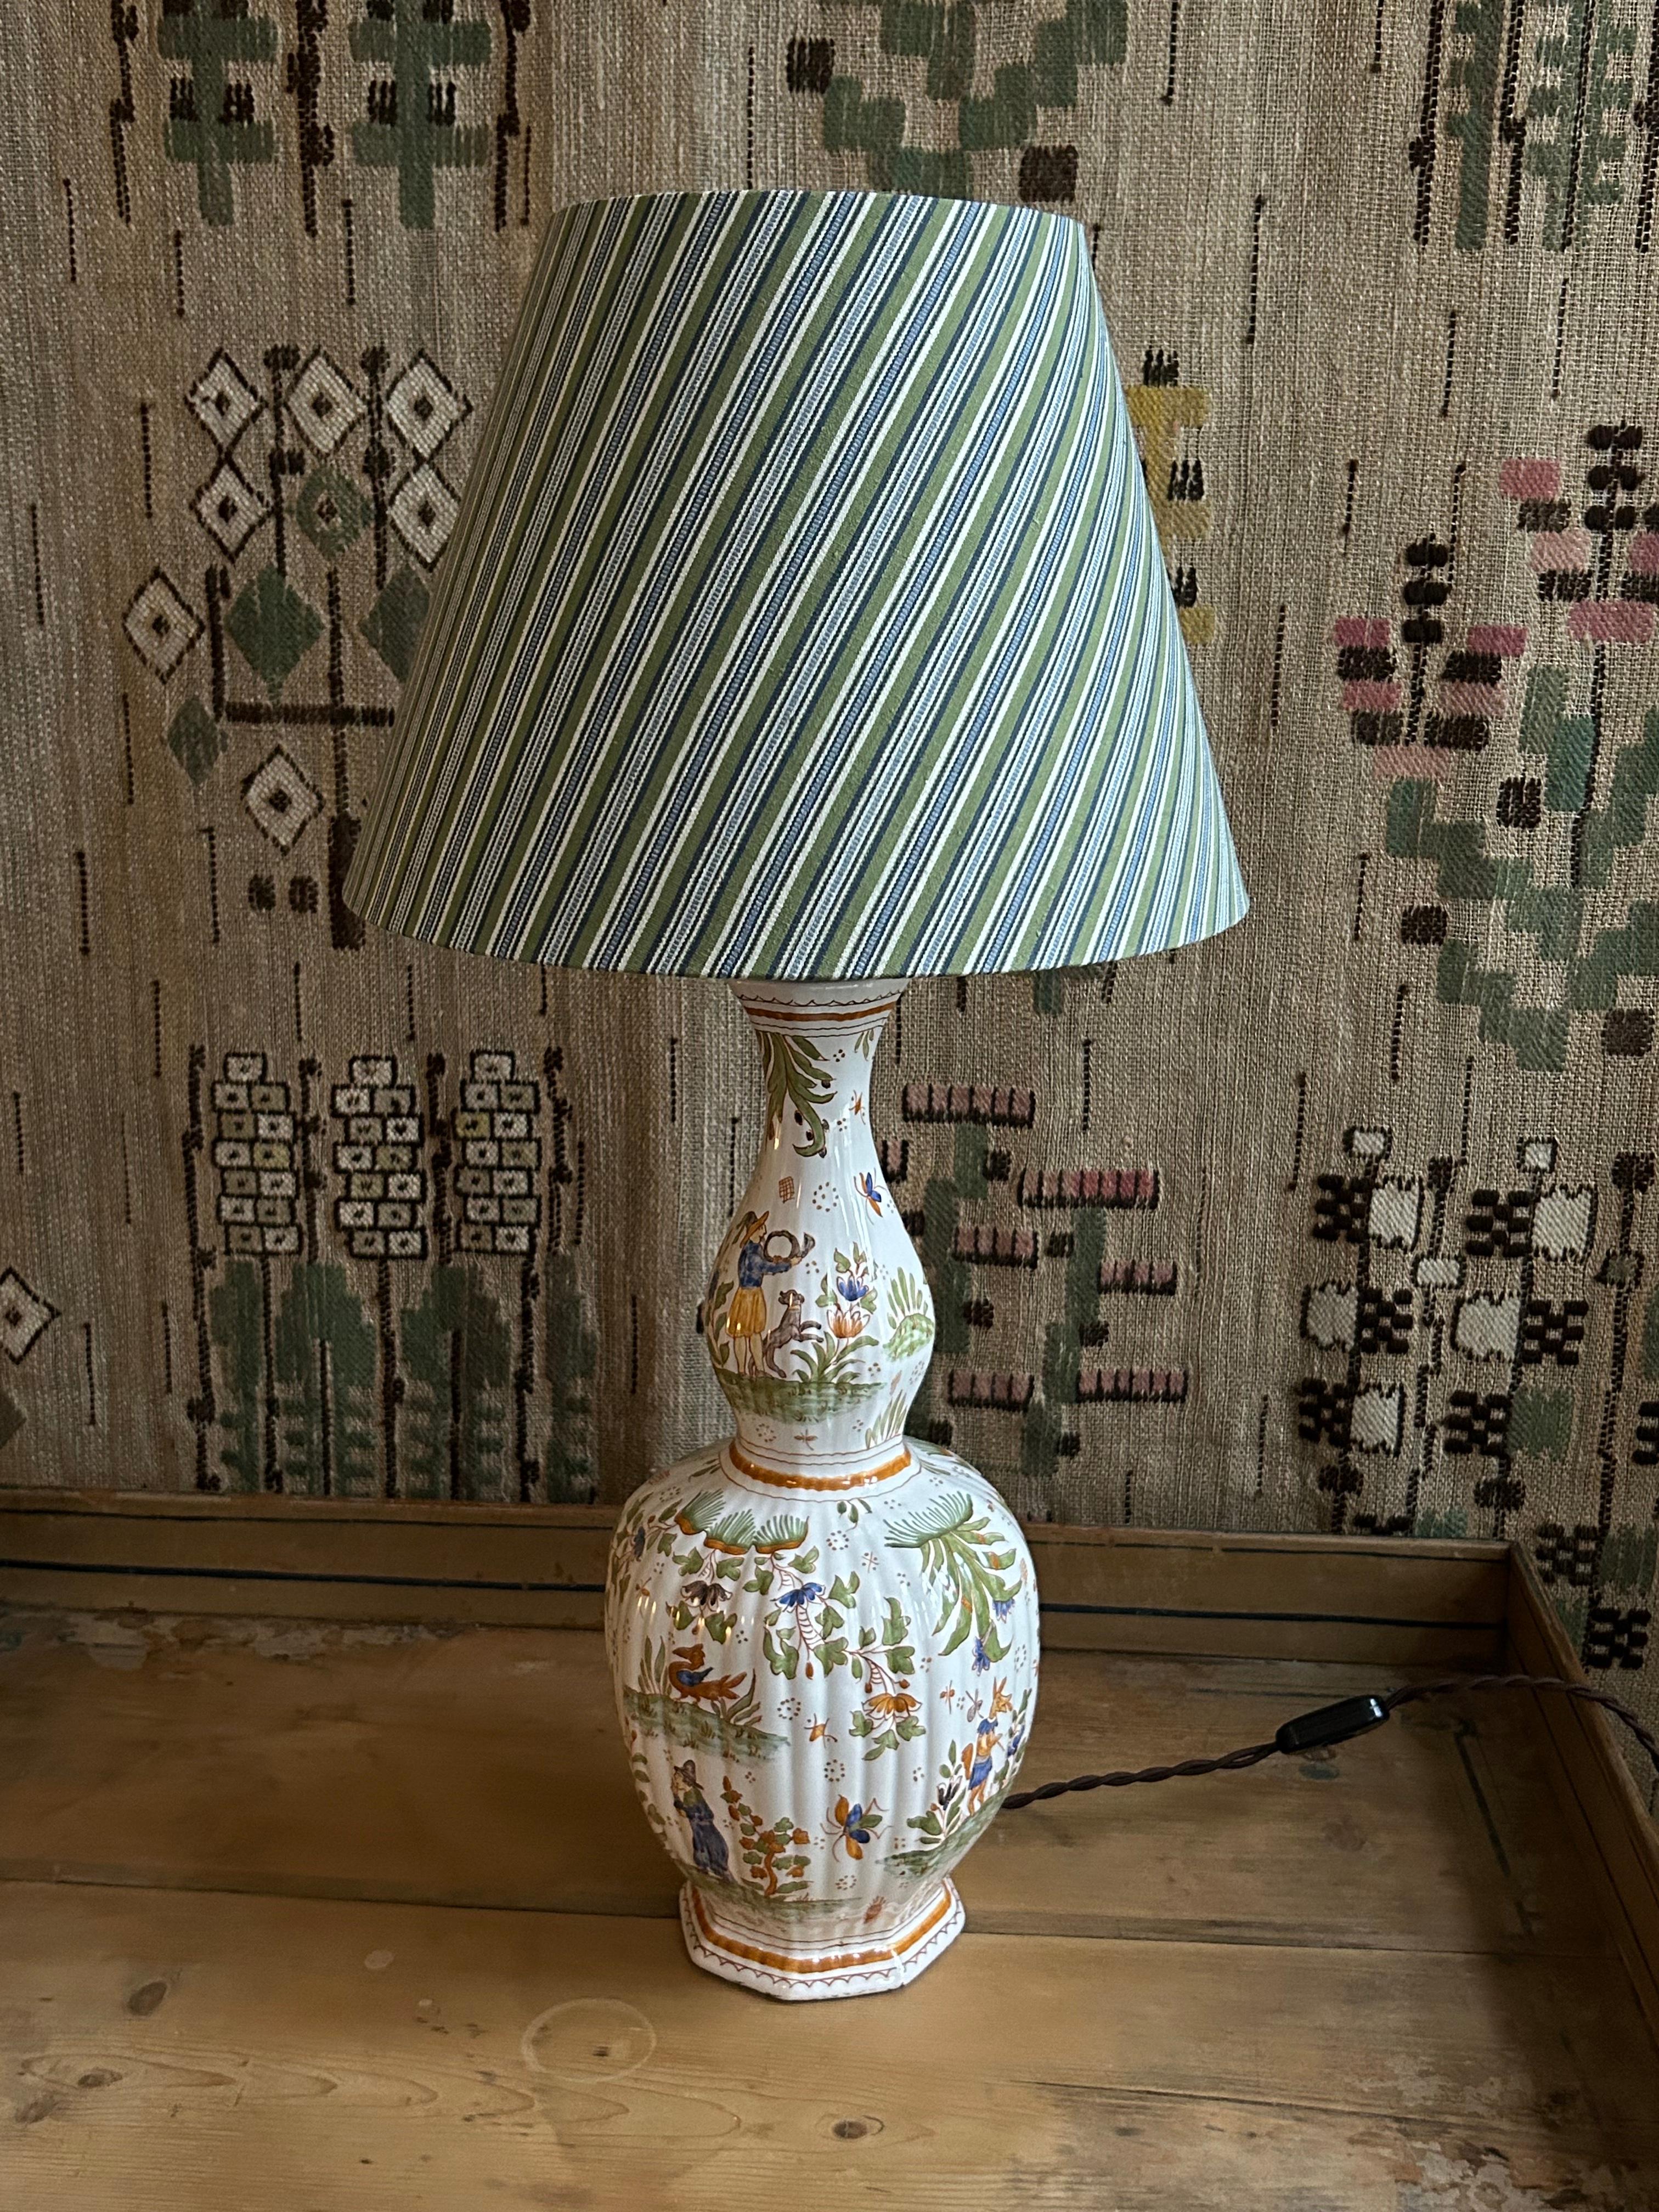 French Vintage Faience Ceramic Table Lamp with Customized Shade, France, 20th Century